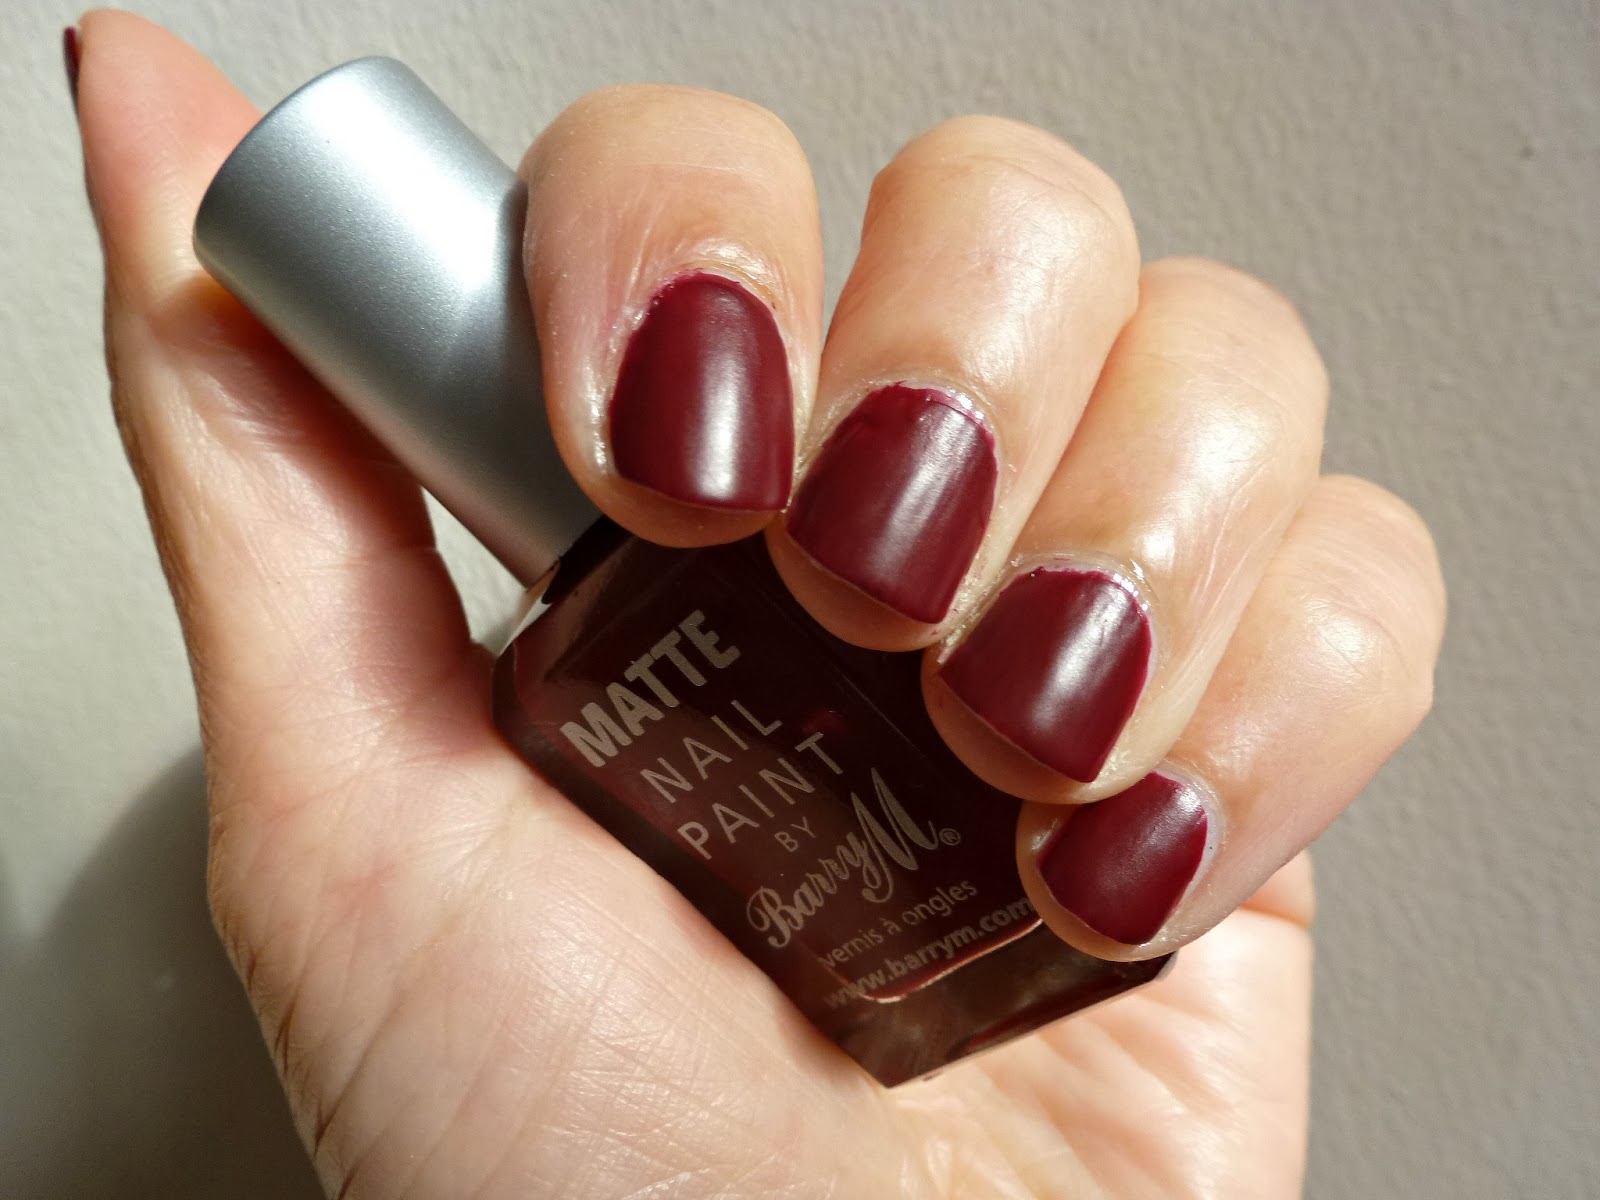 A picture of Barry M Matte Nail Paint in Crush